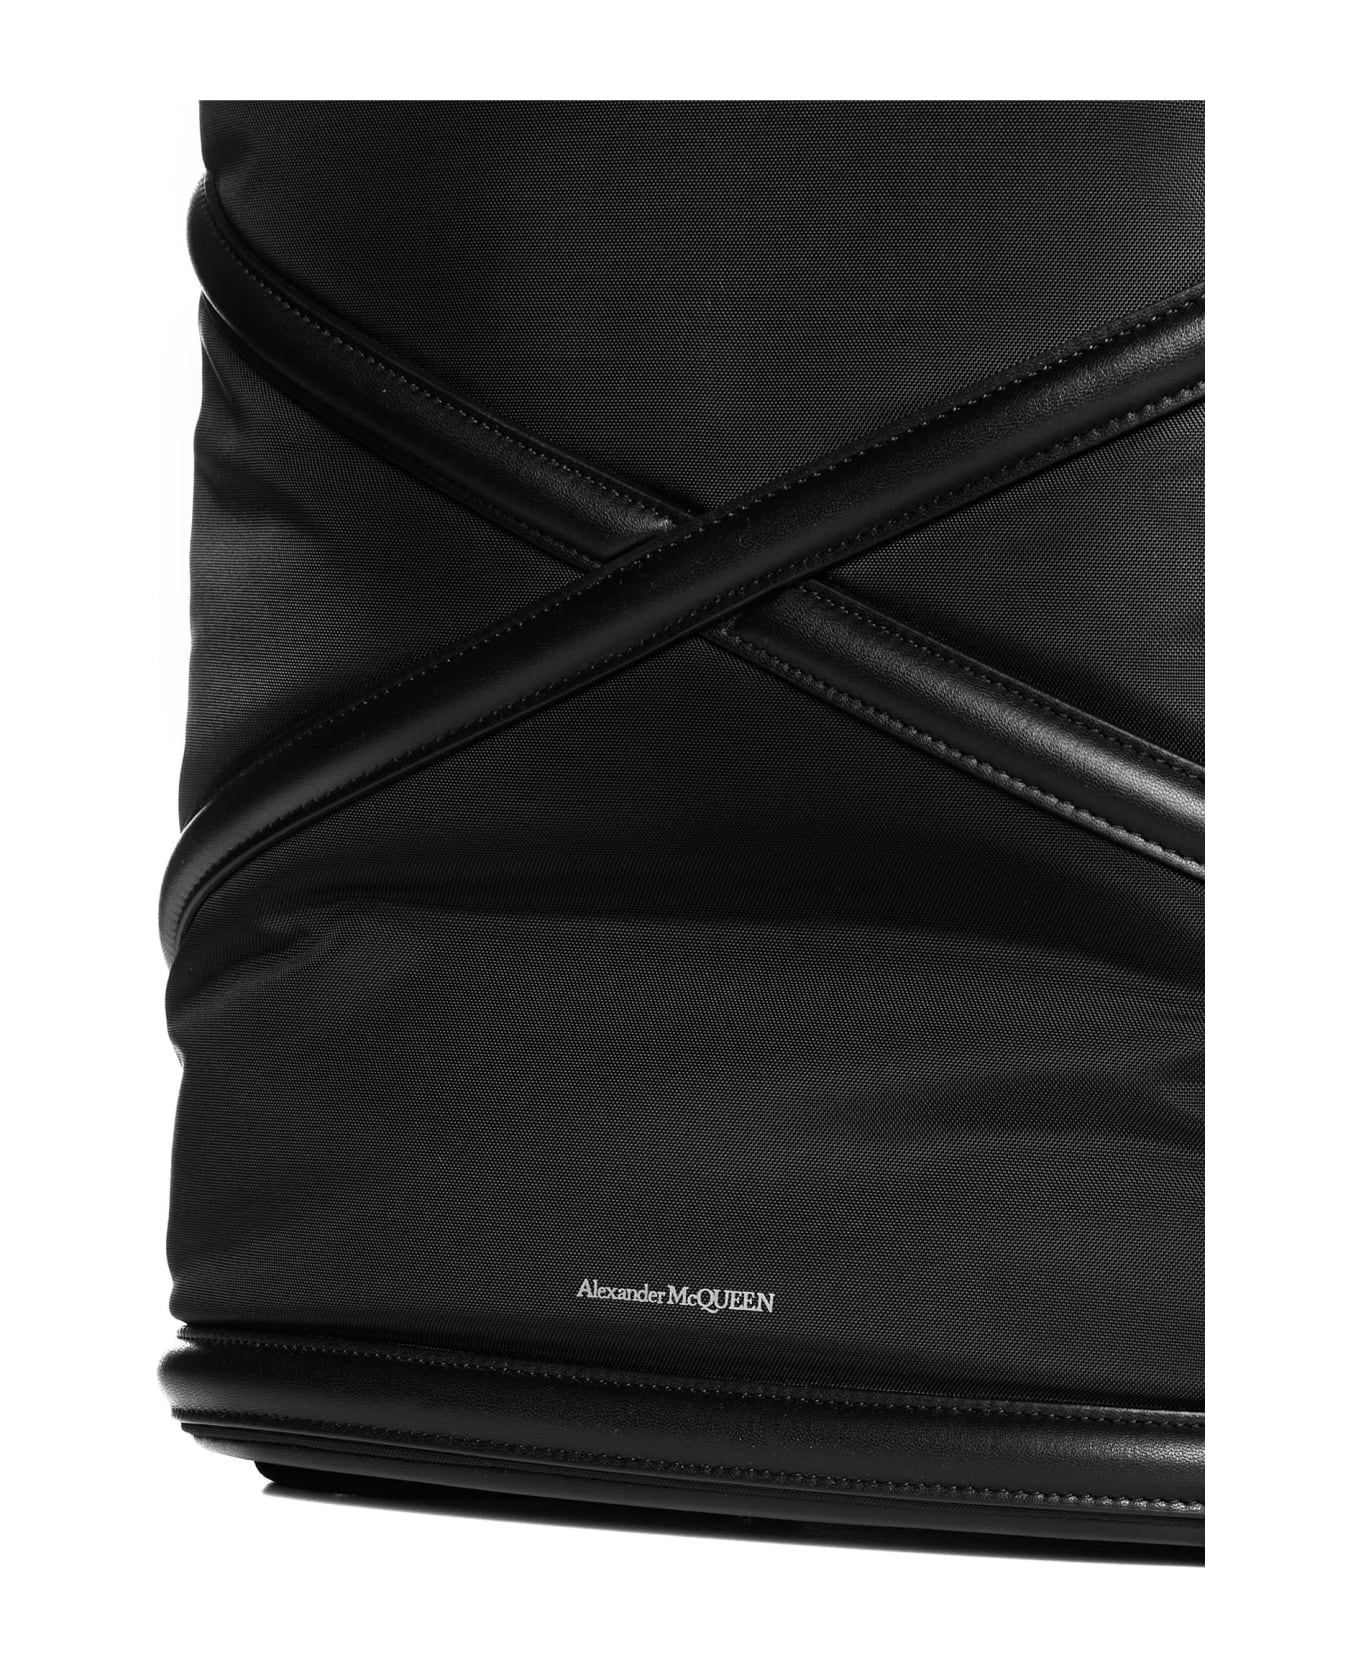 Harness Leather Details Nylon Backpack - 4